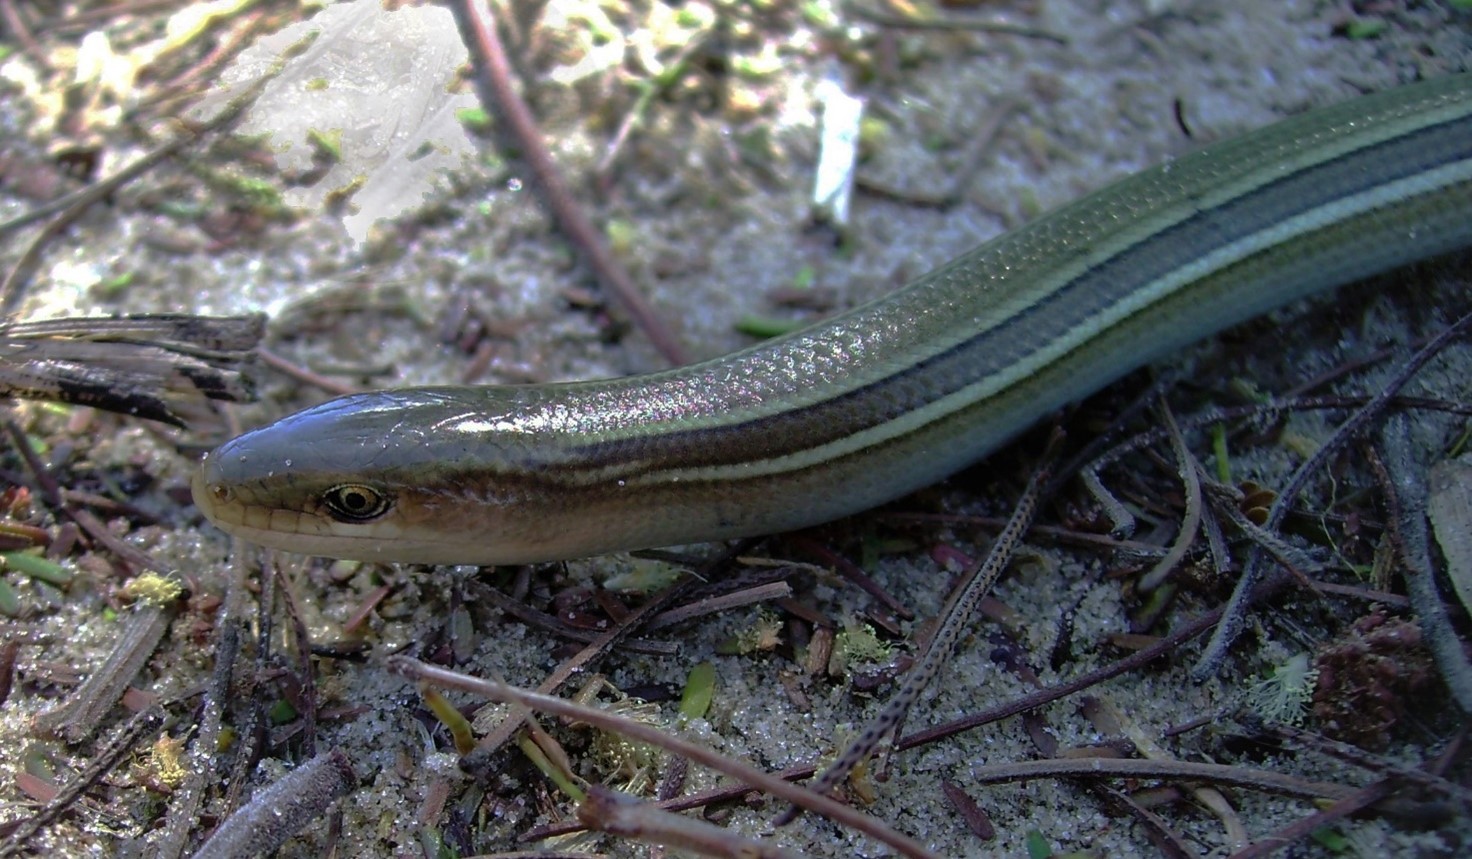 A close-up of a legless lizard head and part of its body, green with yellow and blue stripes, against a leaf-litter background